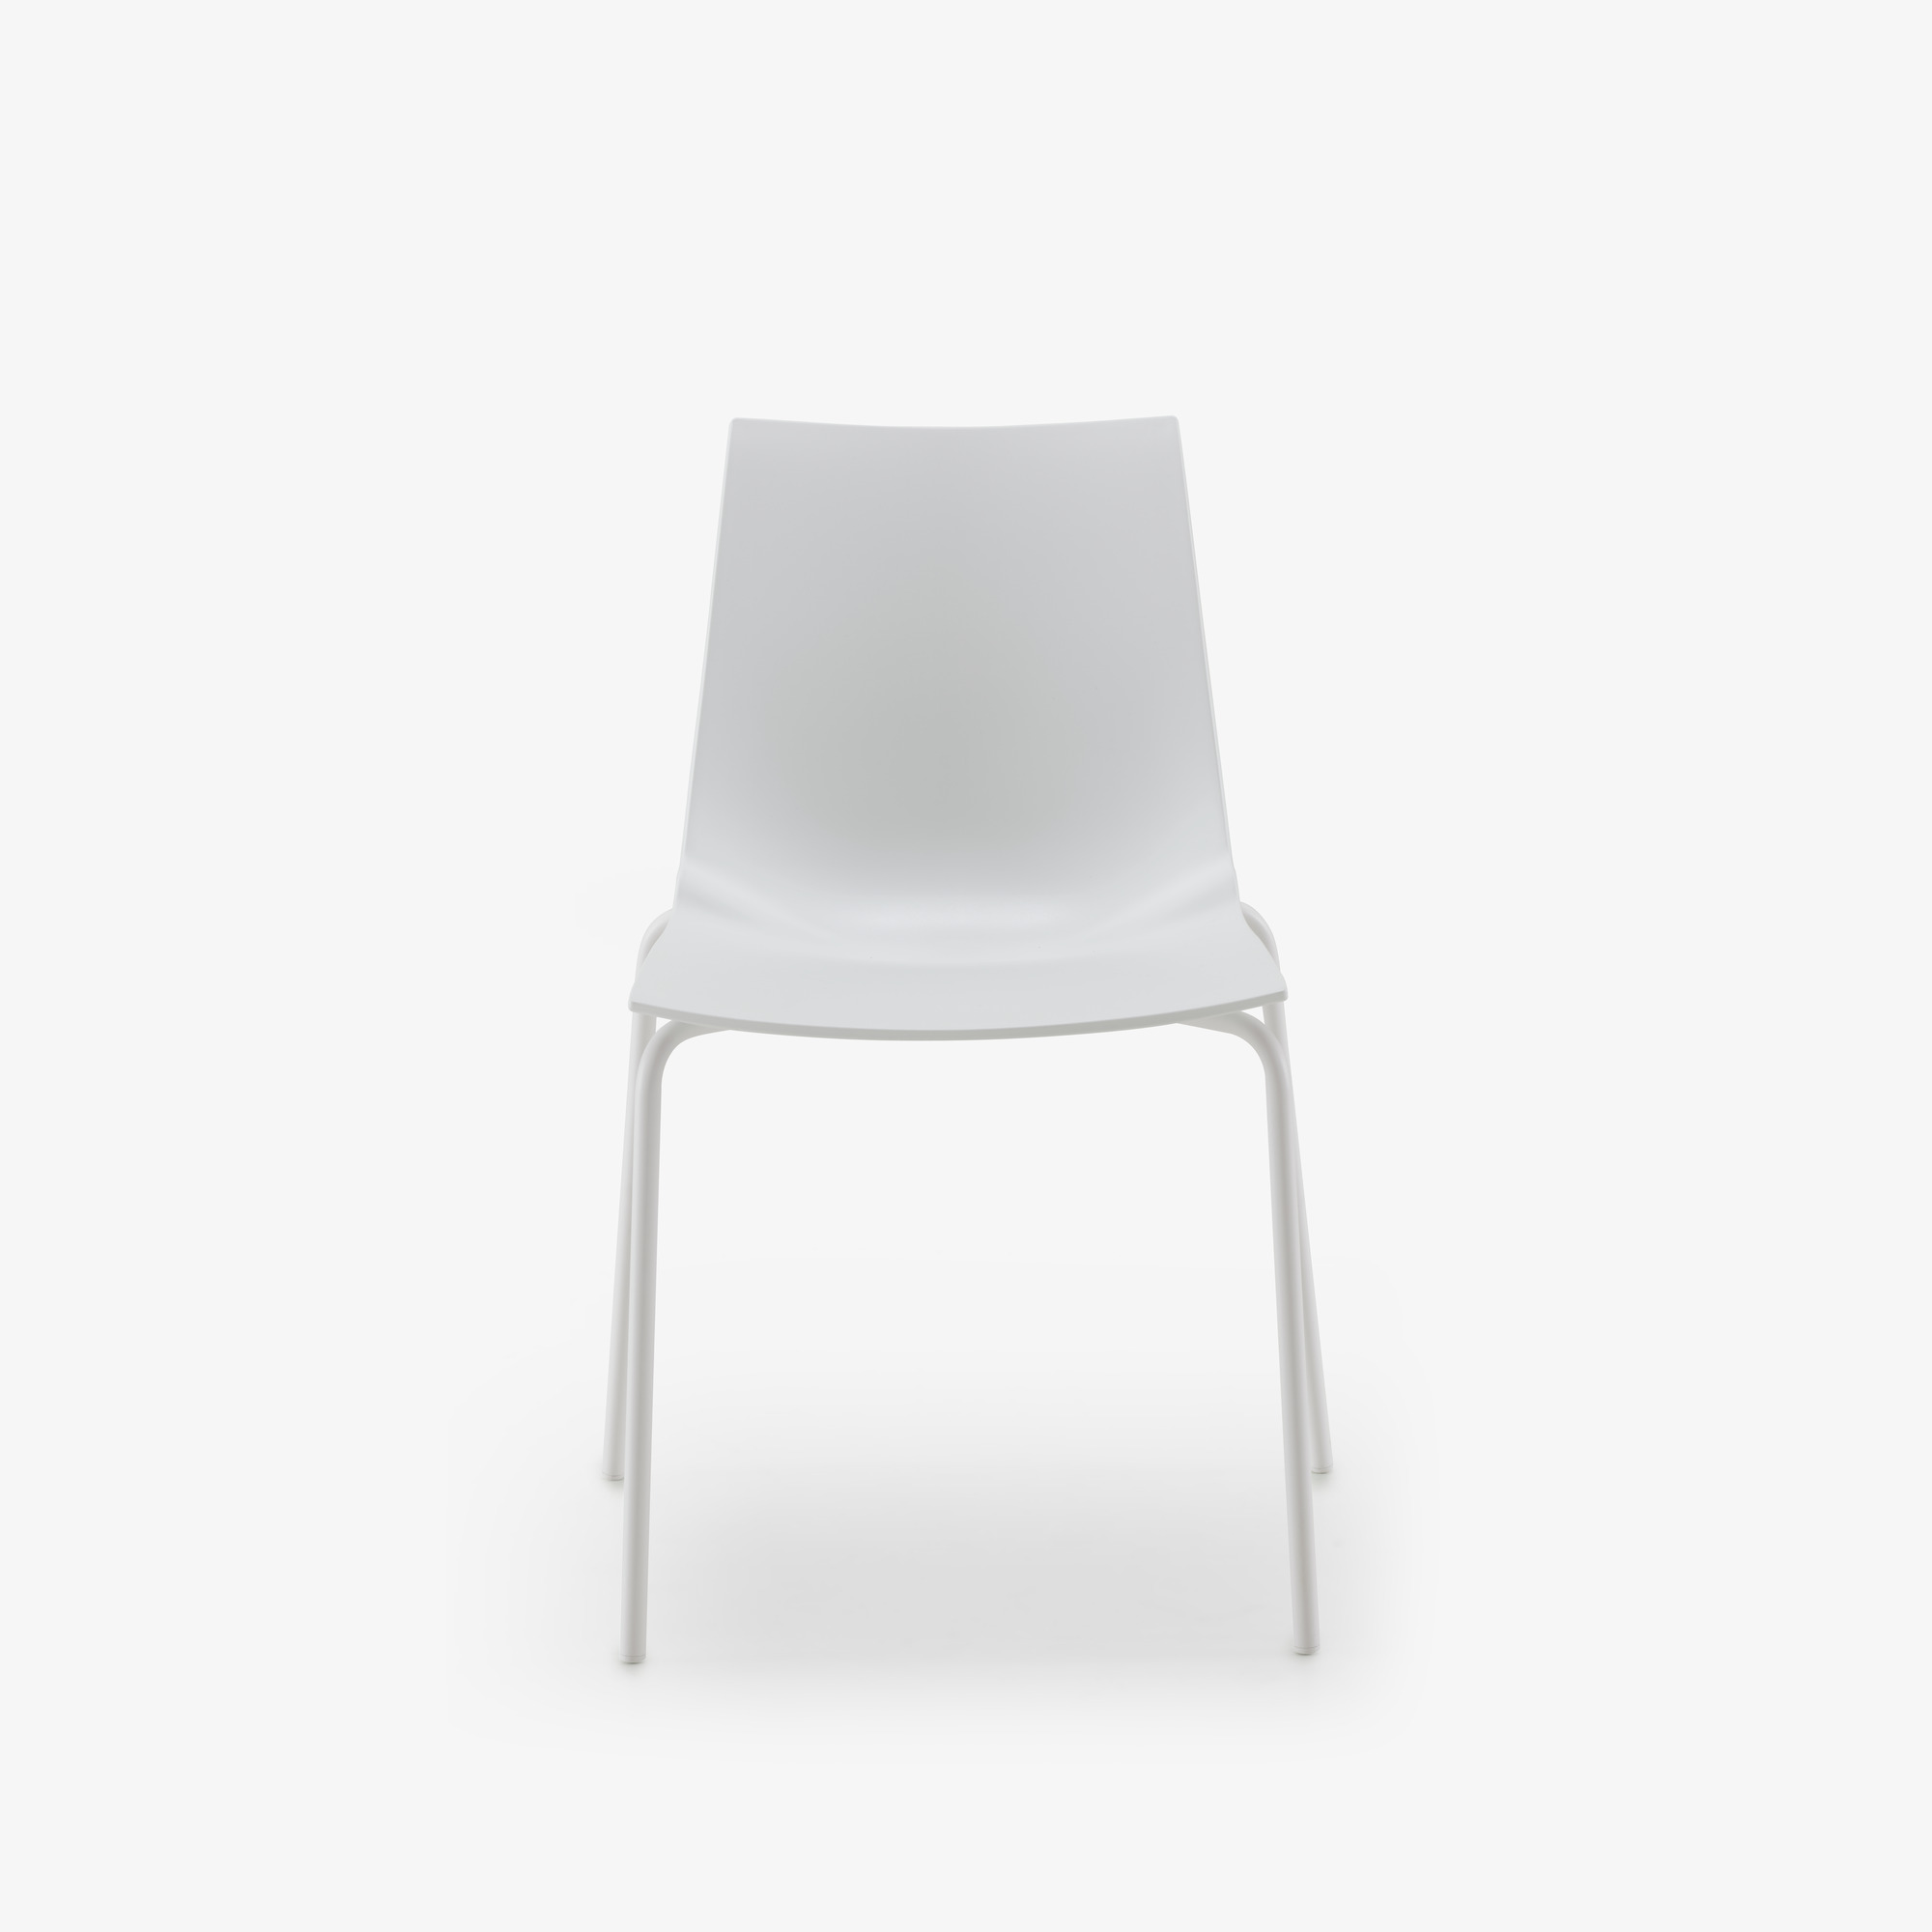 Image SET OF 2 CHAIRS WHITE WHITE LACQUERED BASE